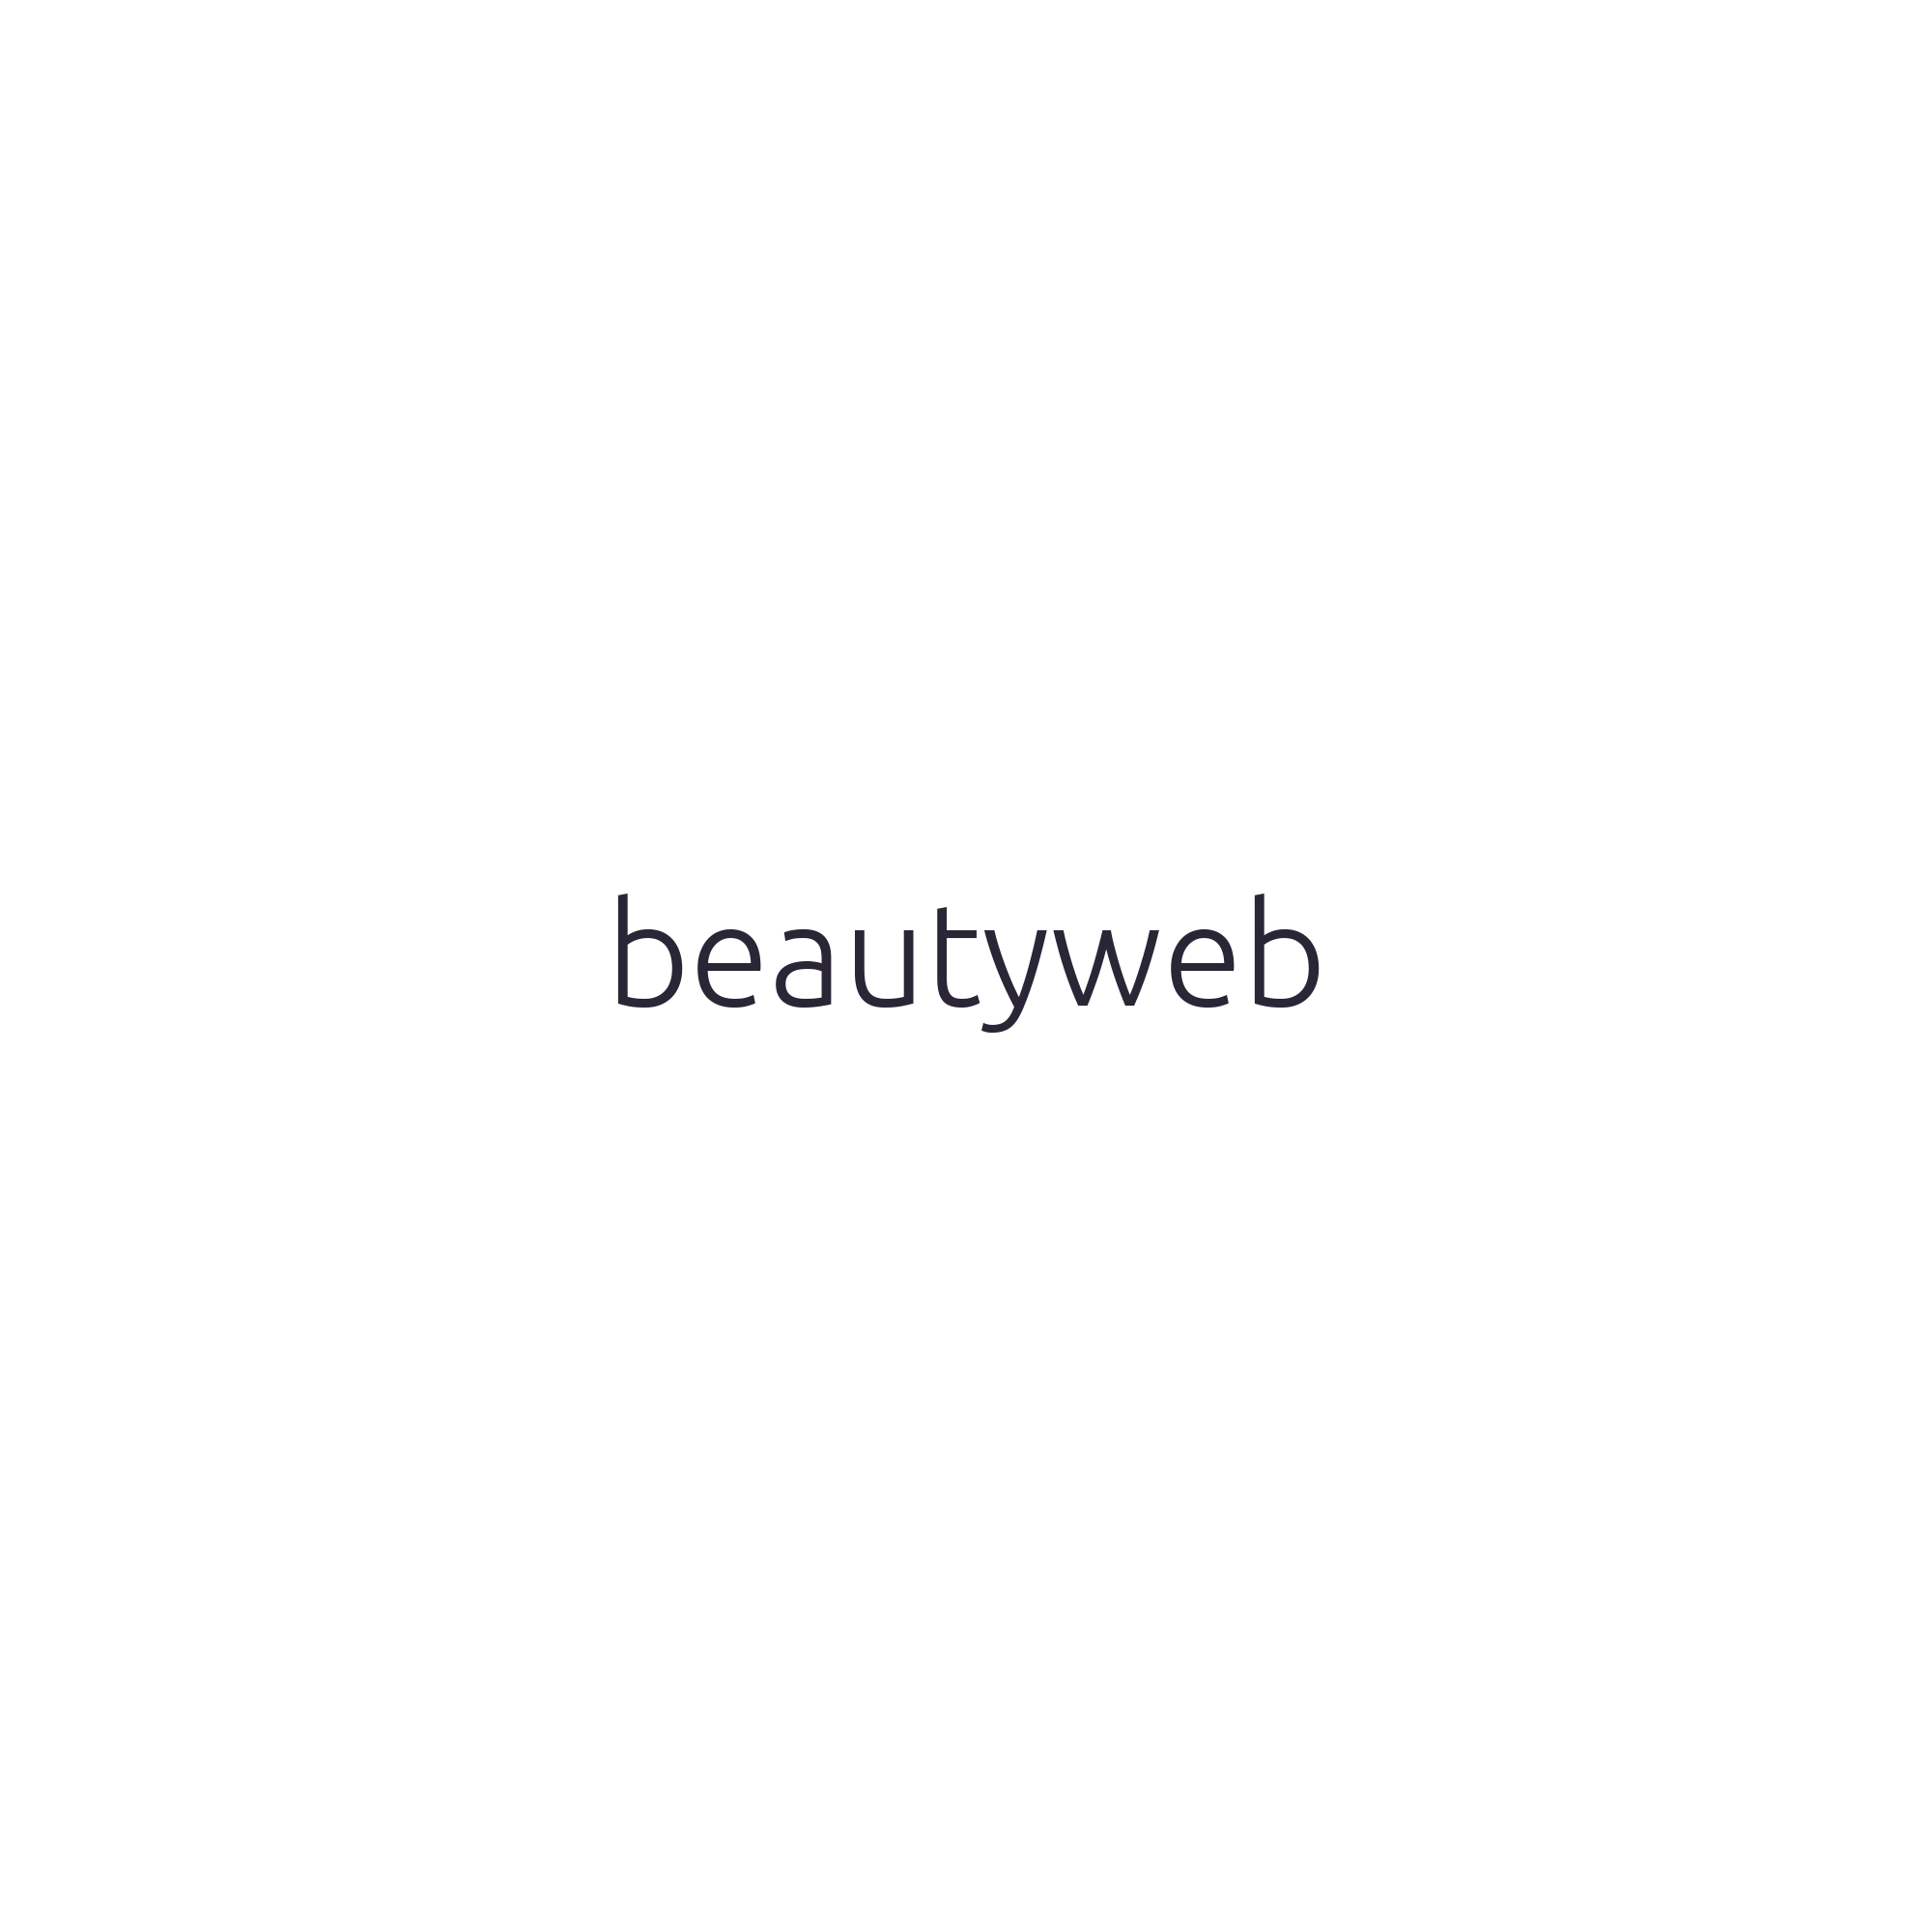 beautyweb -Beautiful Webdesign | Designer with a passion for digital interaction